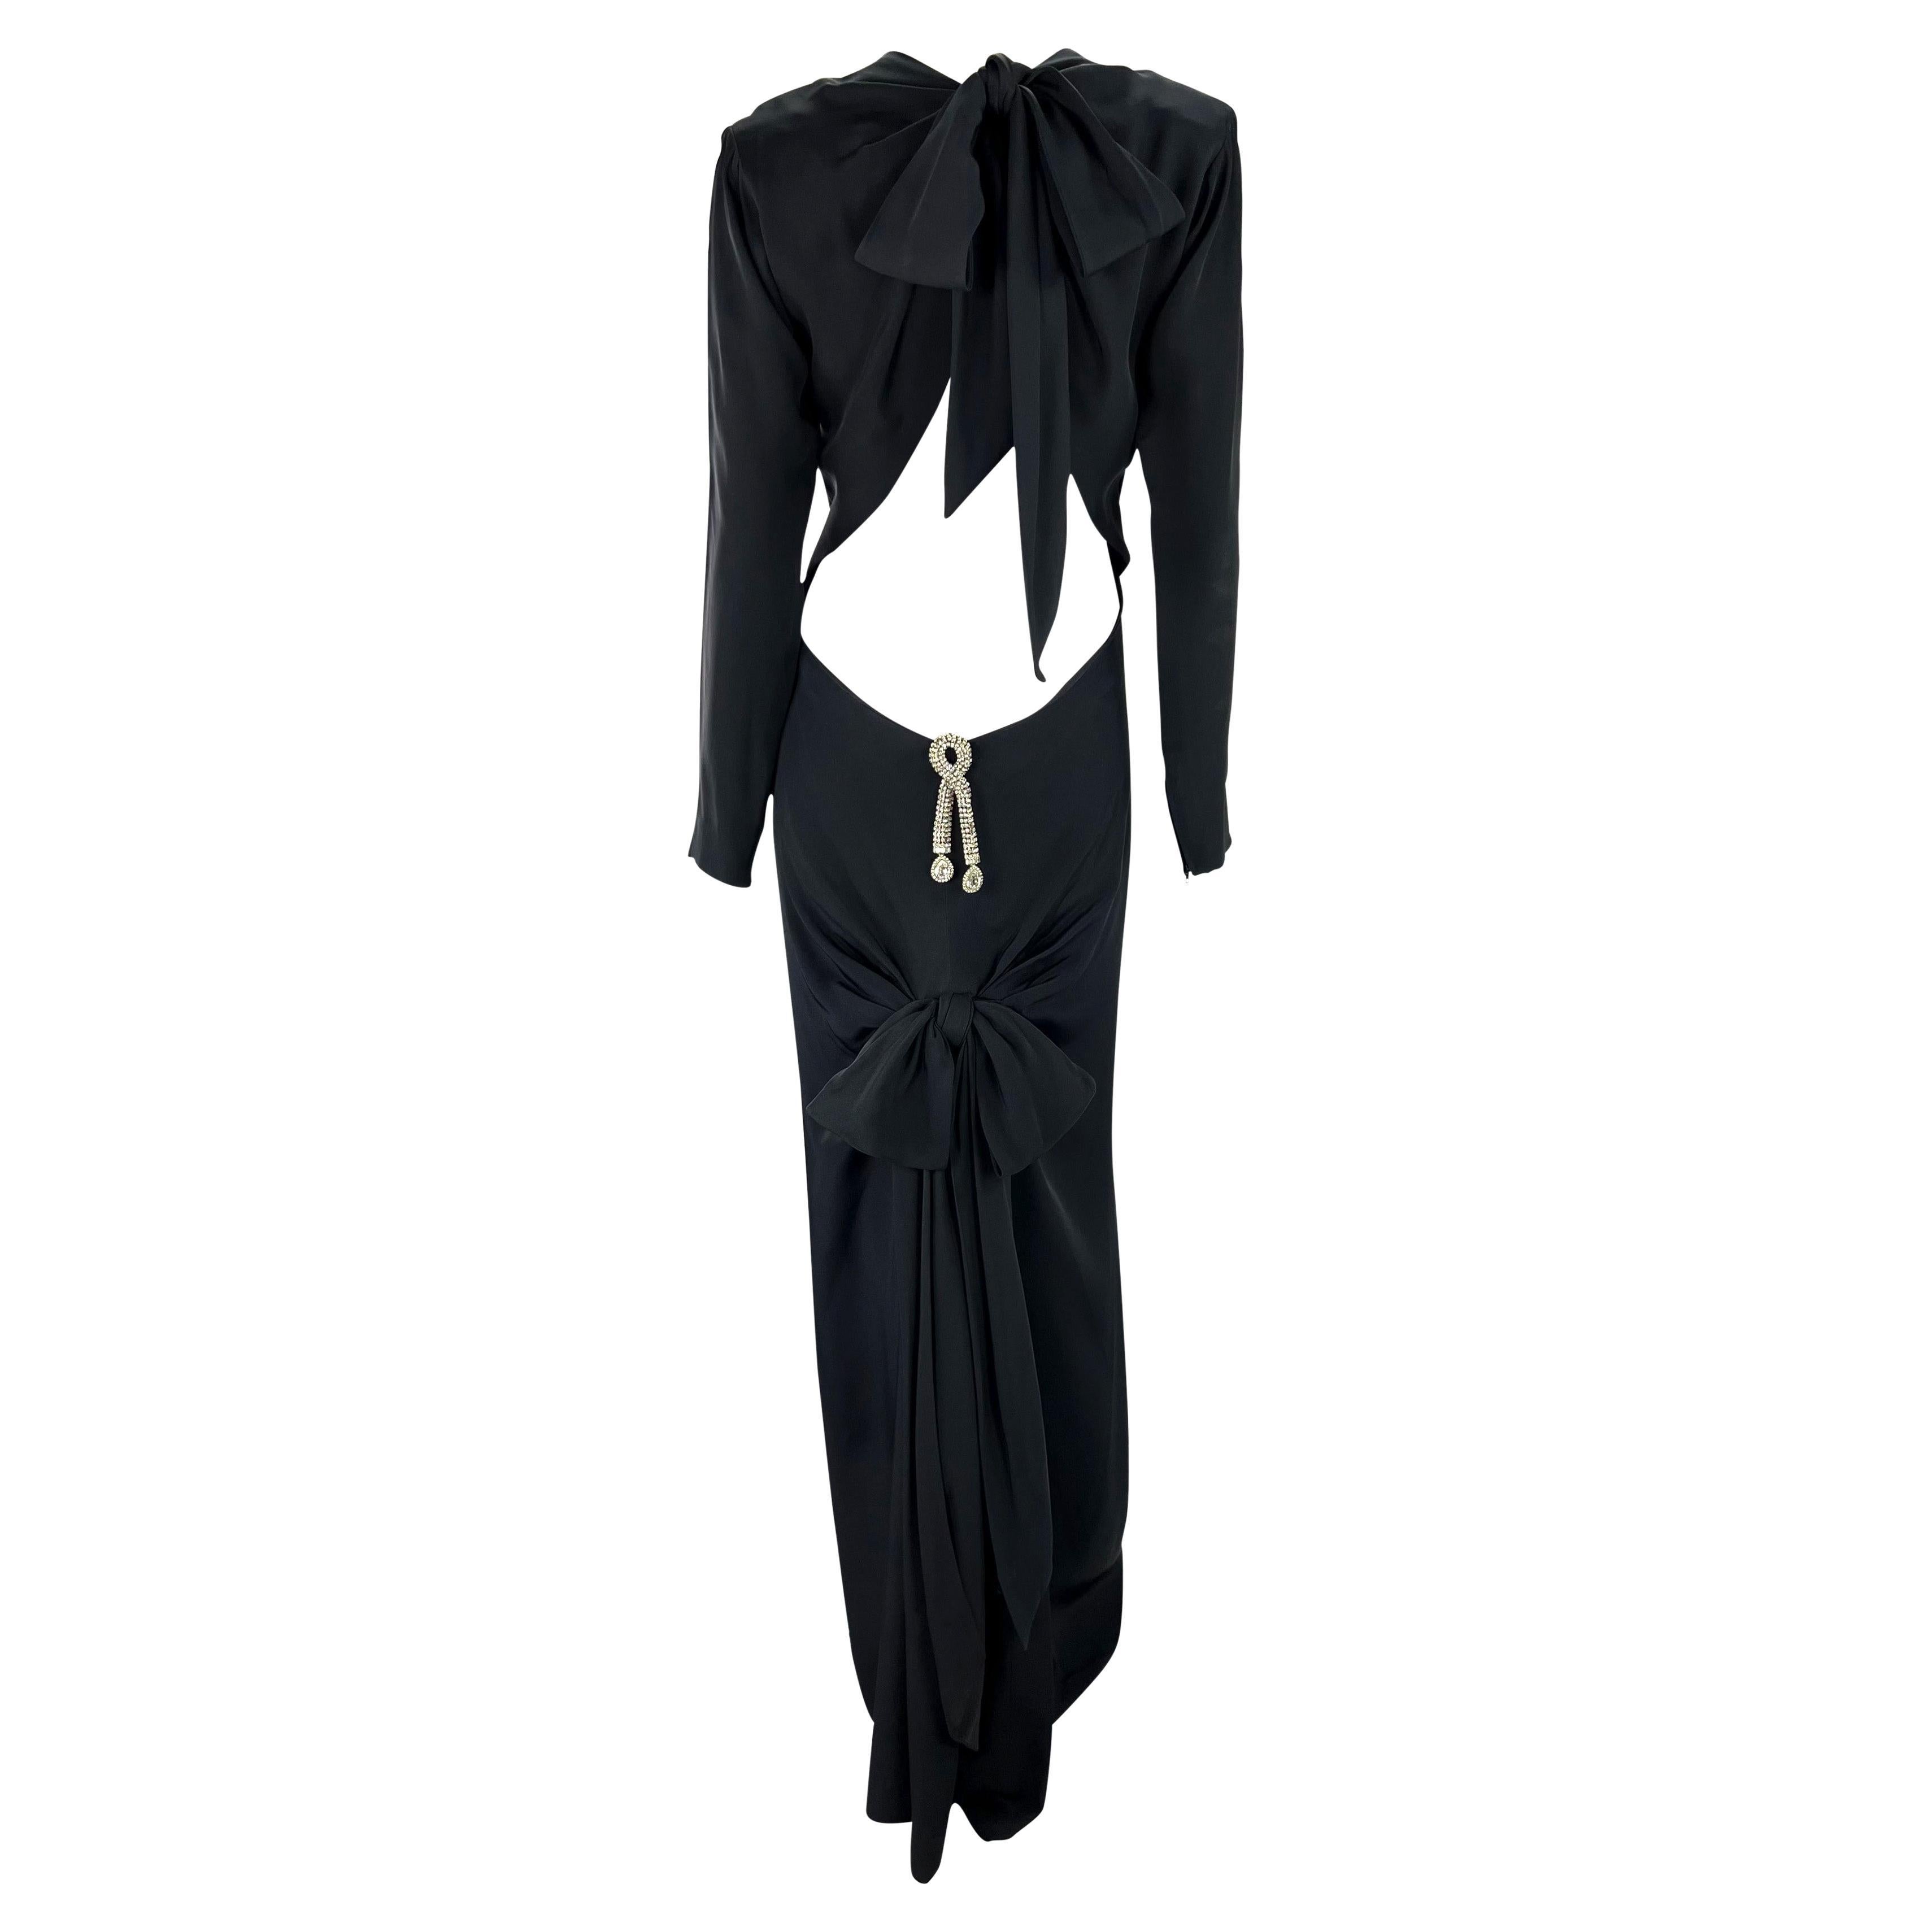 This stunningly sensual black haute couture evening gown was designed by one of the true masters of 20th century couture, Yves Saint Laurent. Designed by YSL for his  Fall/Winter 1983 Haute Couture collection, this gown is paired down and chic from